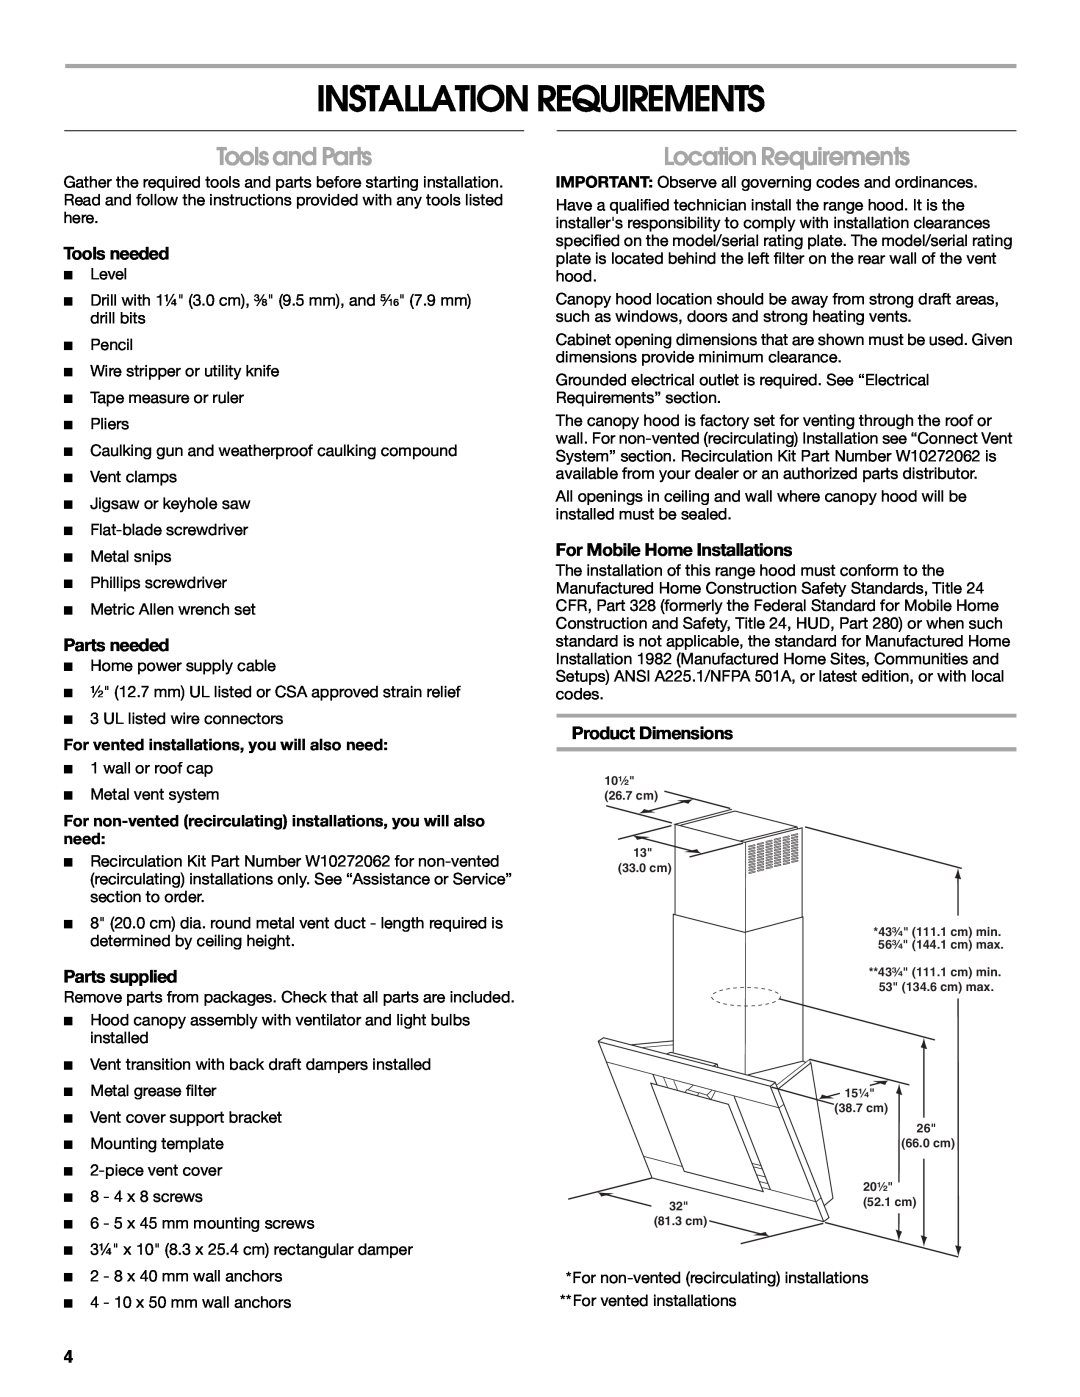 Jenn-Air W10274314C Installation Requirements, Tools and Parts, Location Requirements, Tools needed, Parts needed 